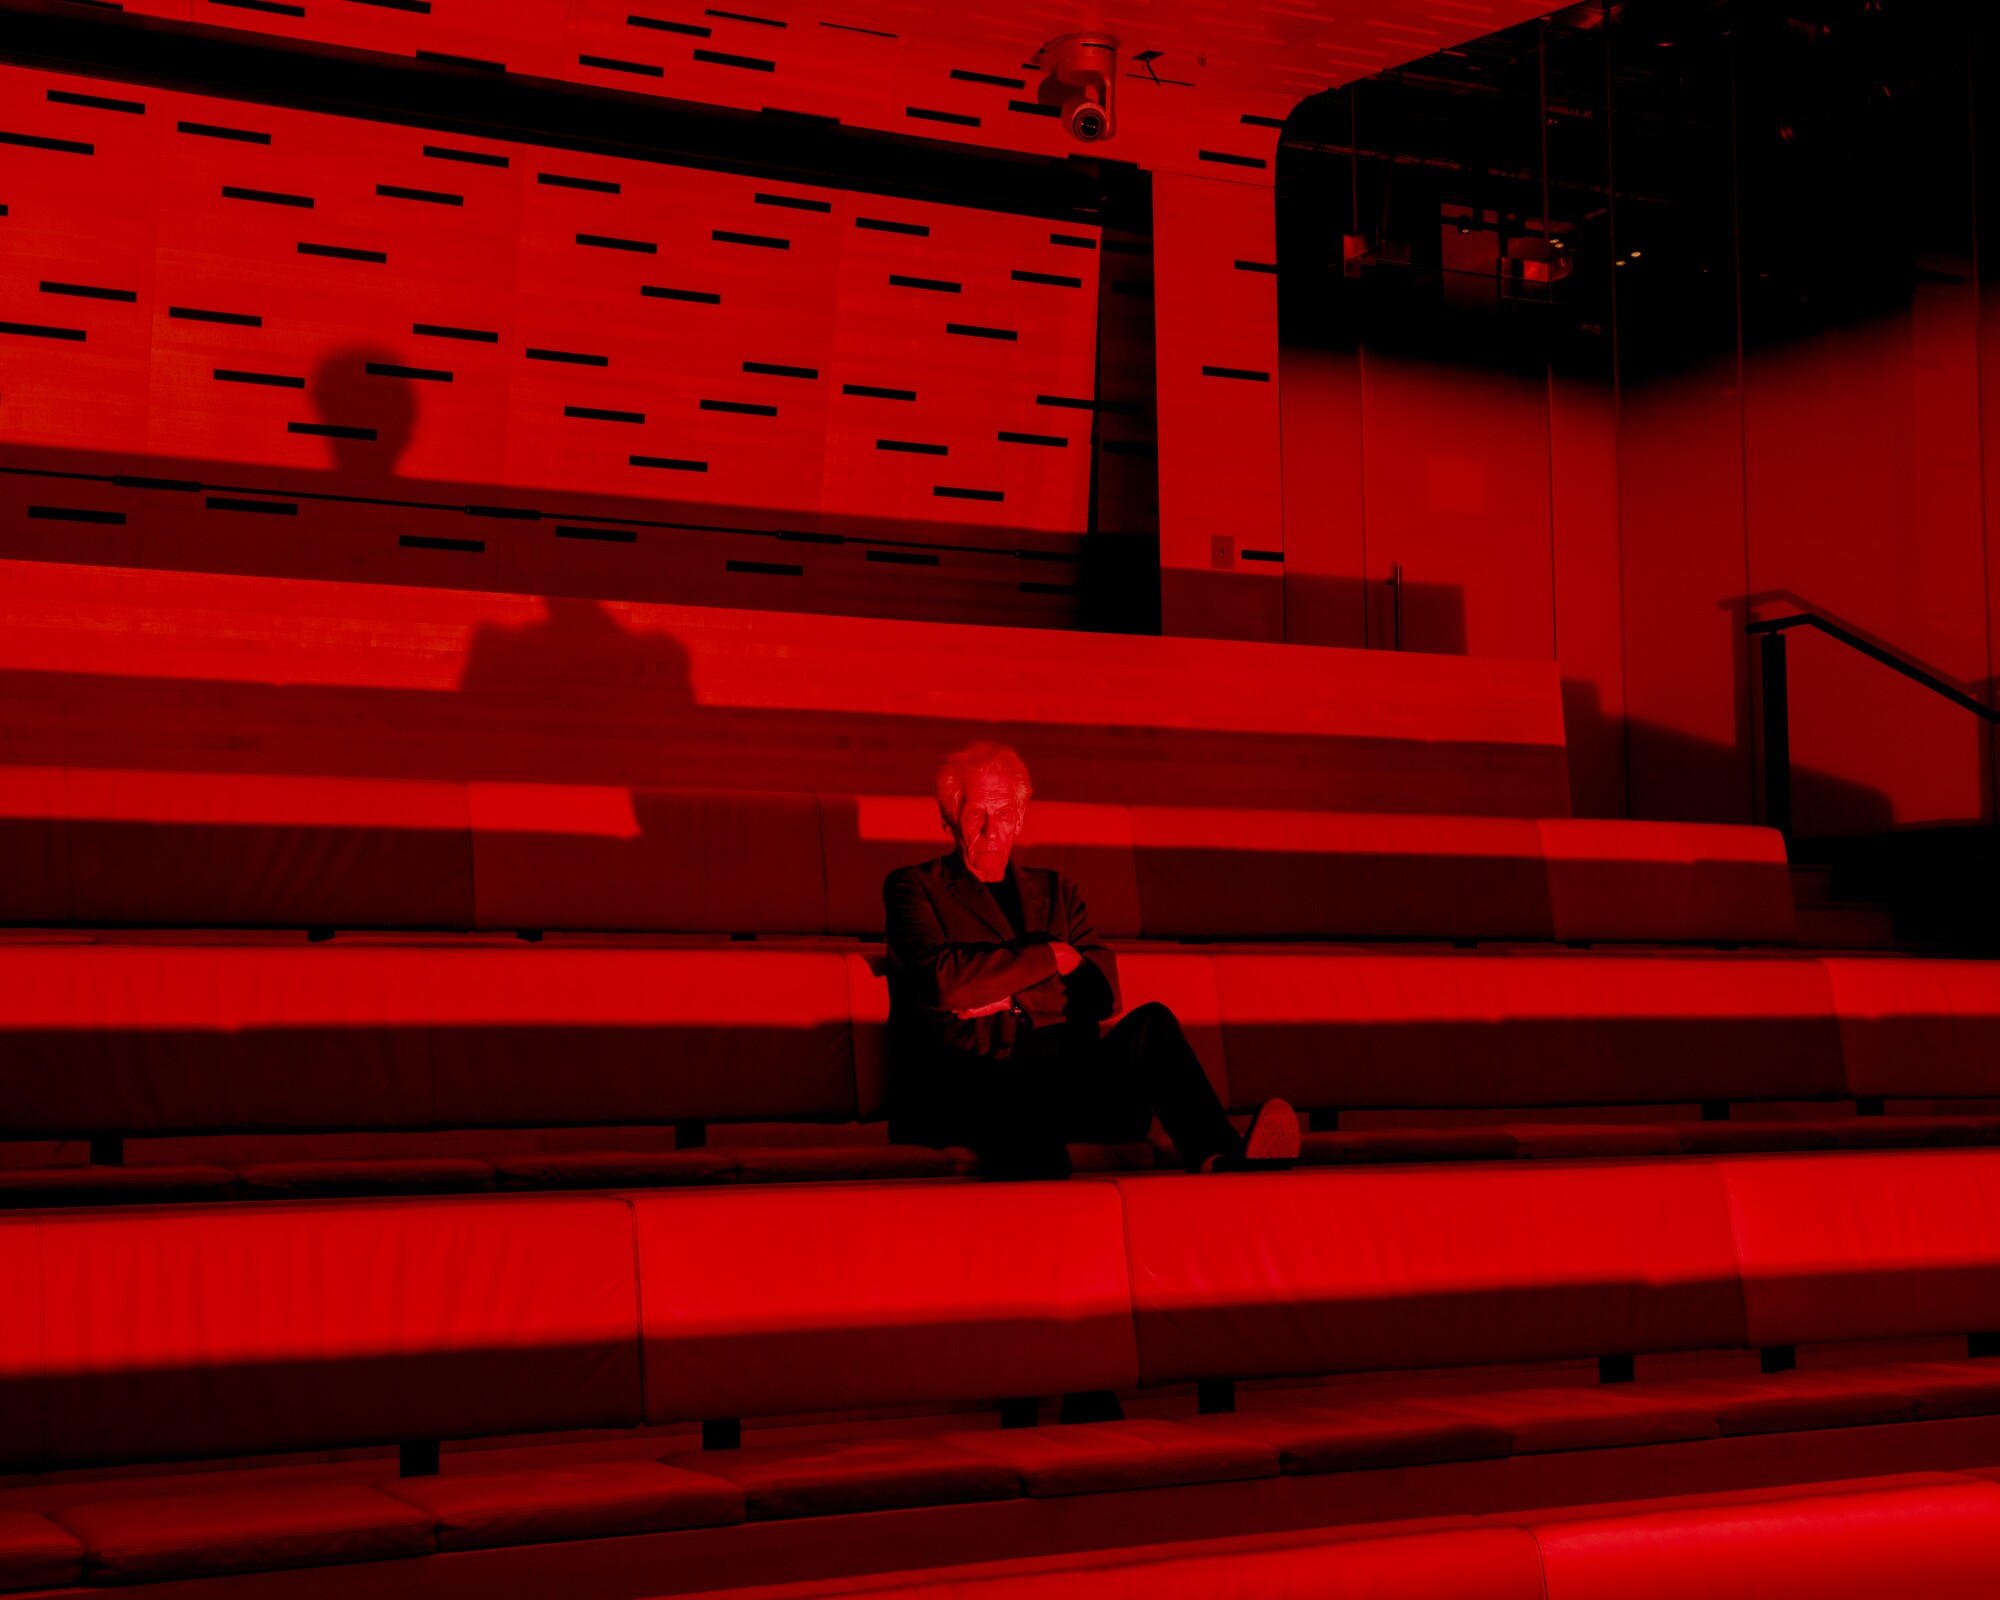 A man sits on stadium-style seats under red lighting